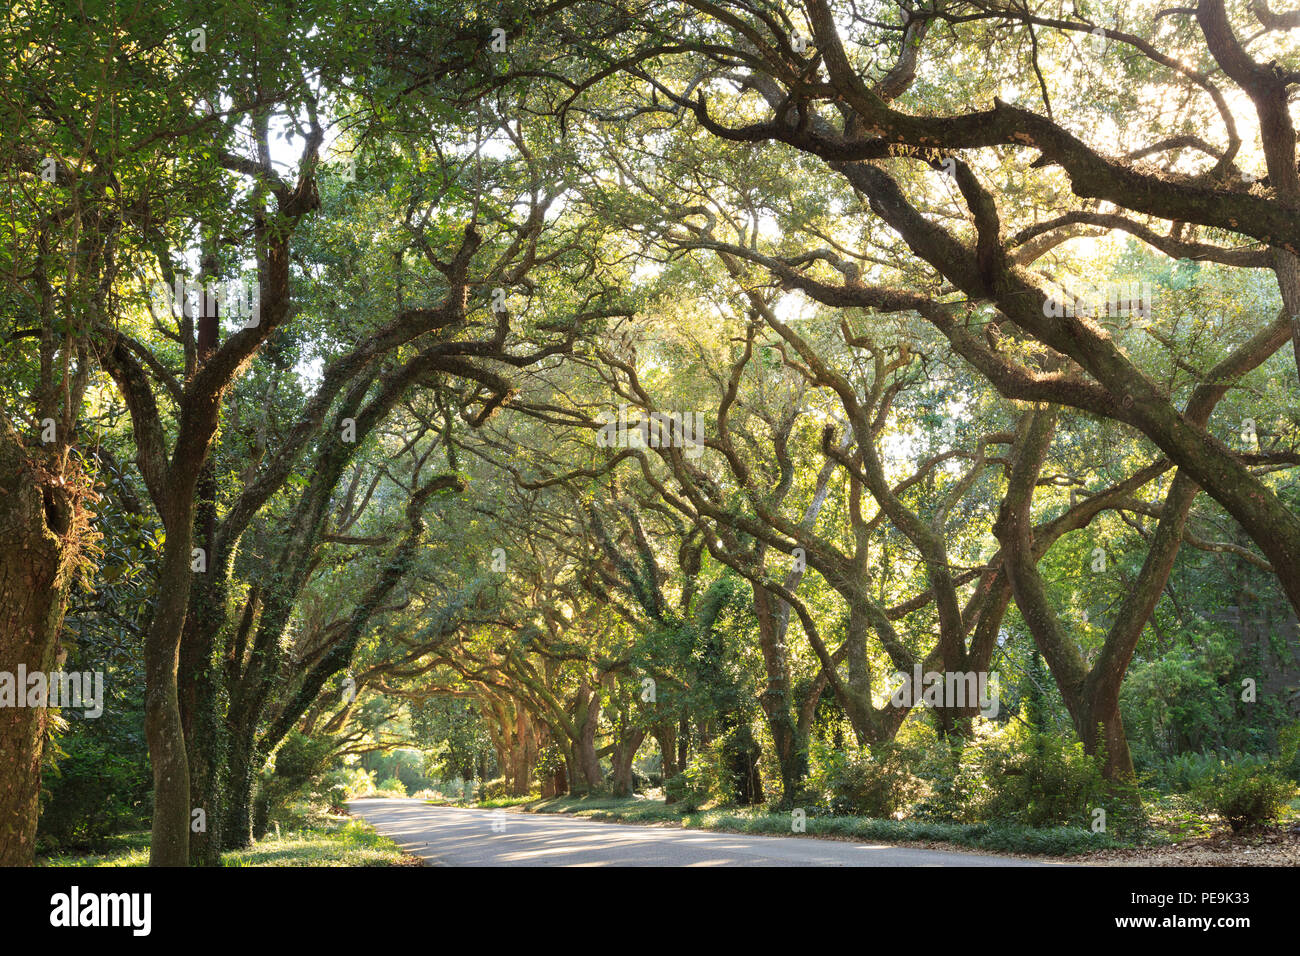 Hundred-Year Old Live Oak allee over road, Magnolia Springs, Alabama, USA Stock Photo